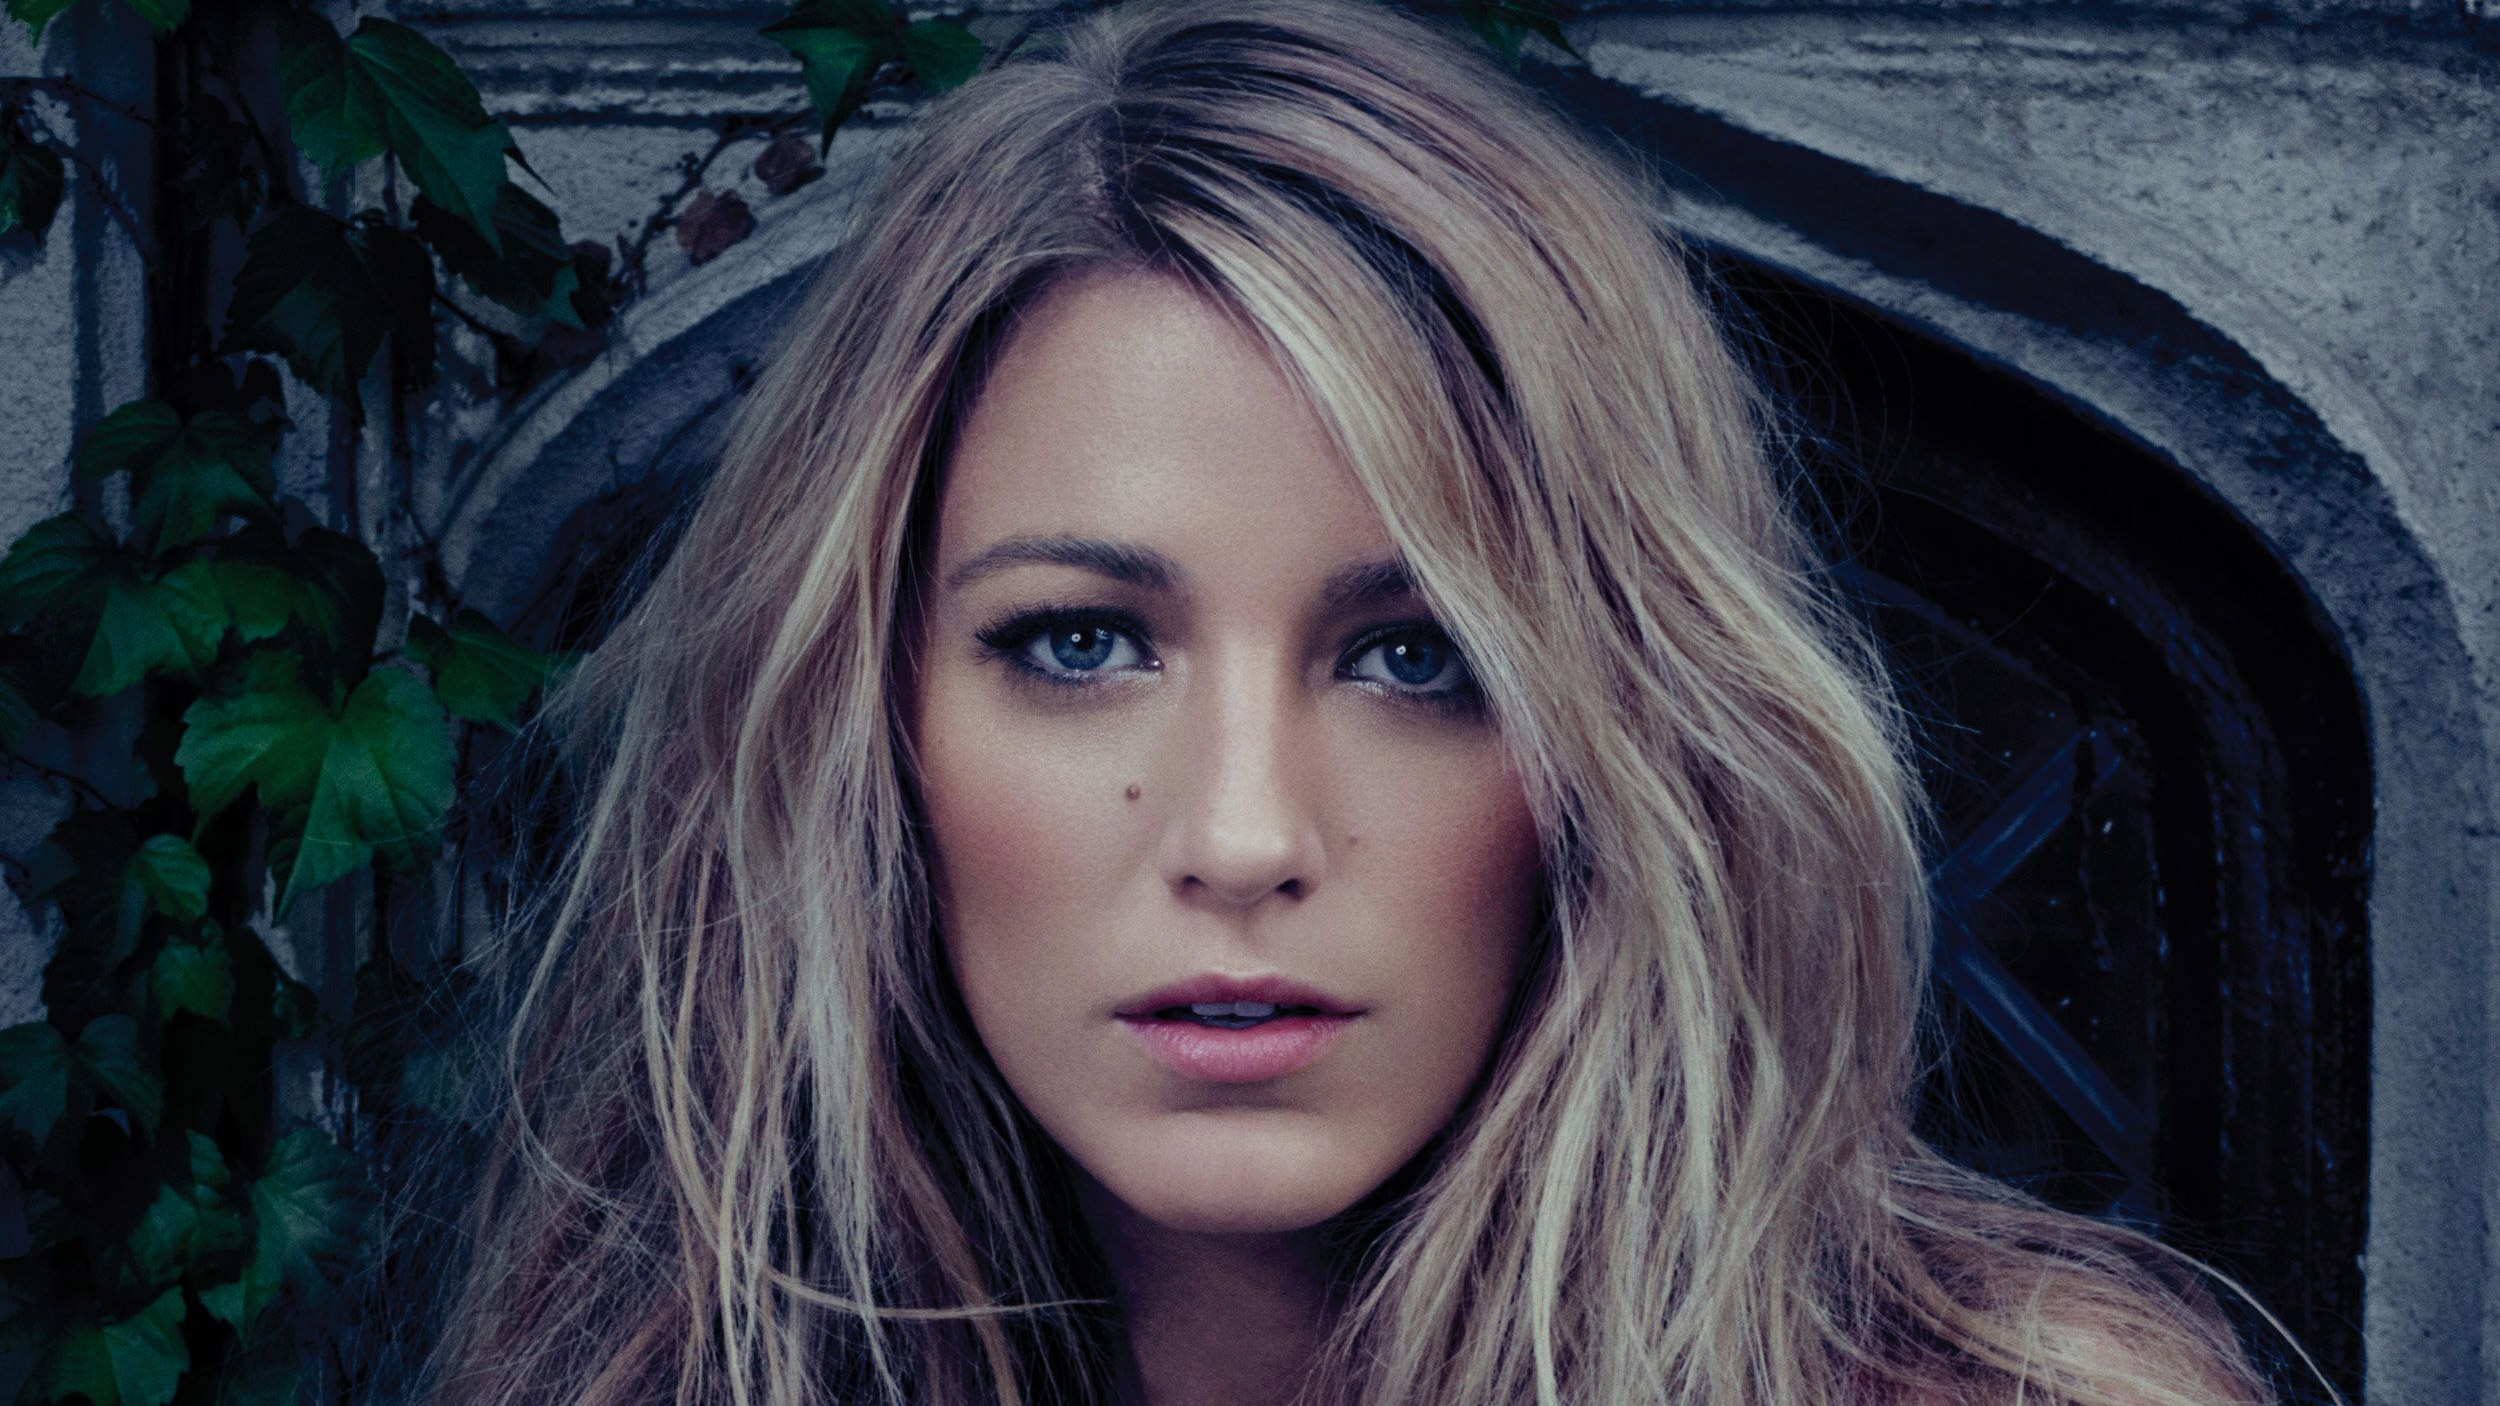 5. Blake Lively - wide 11